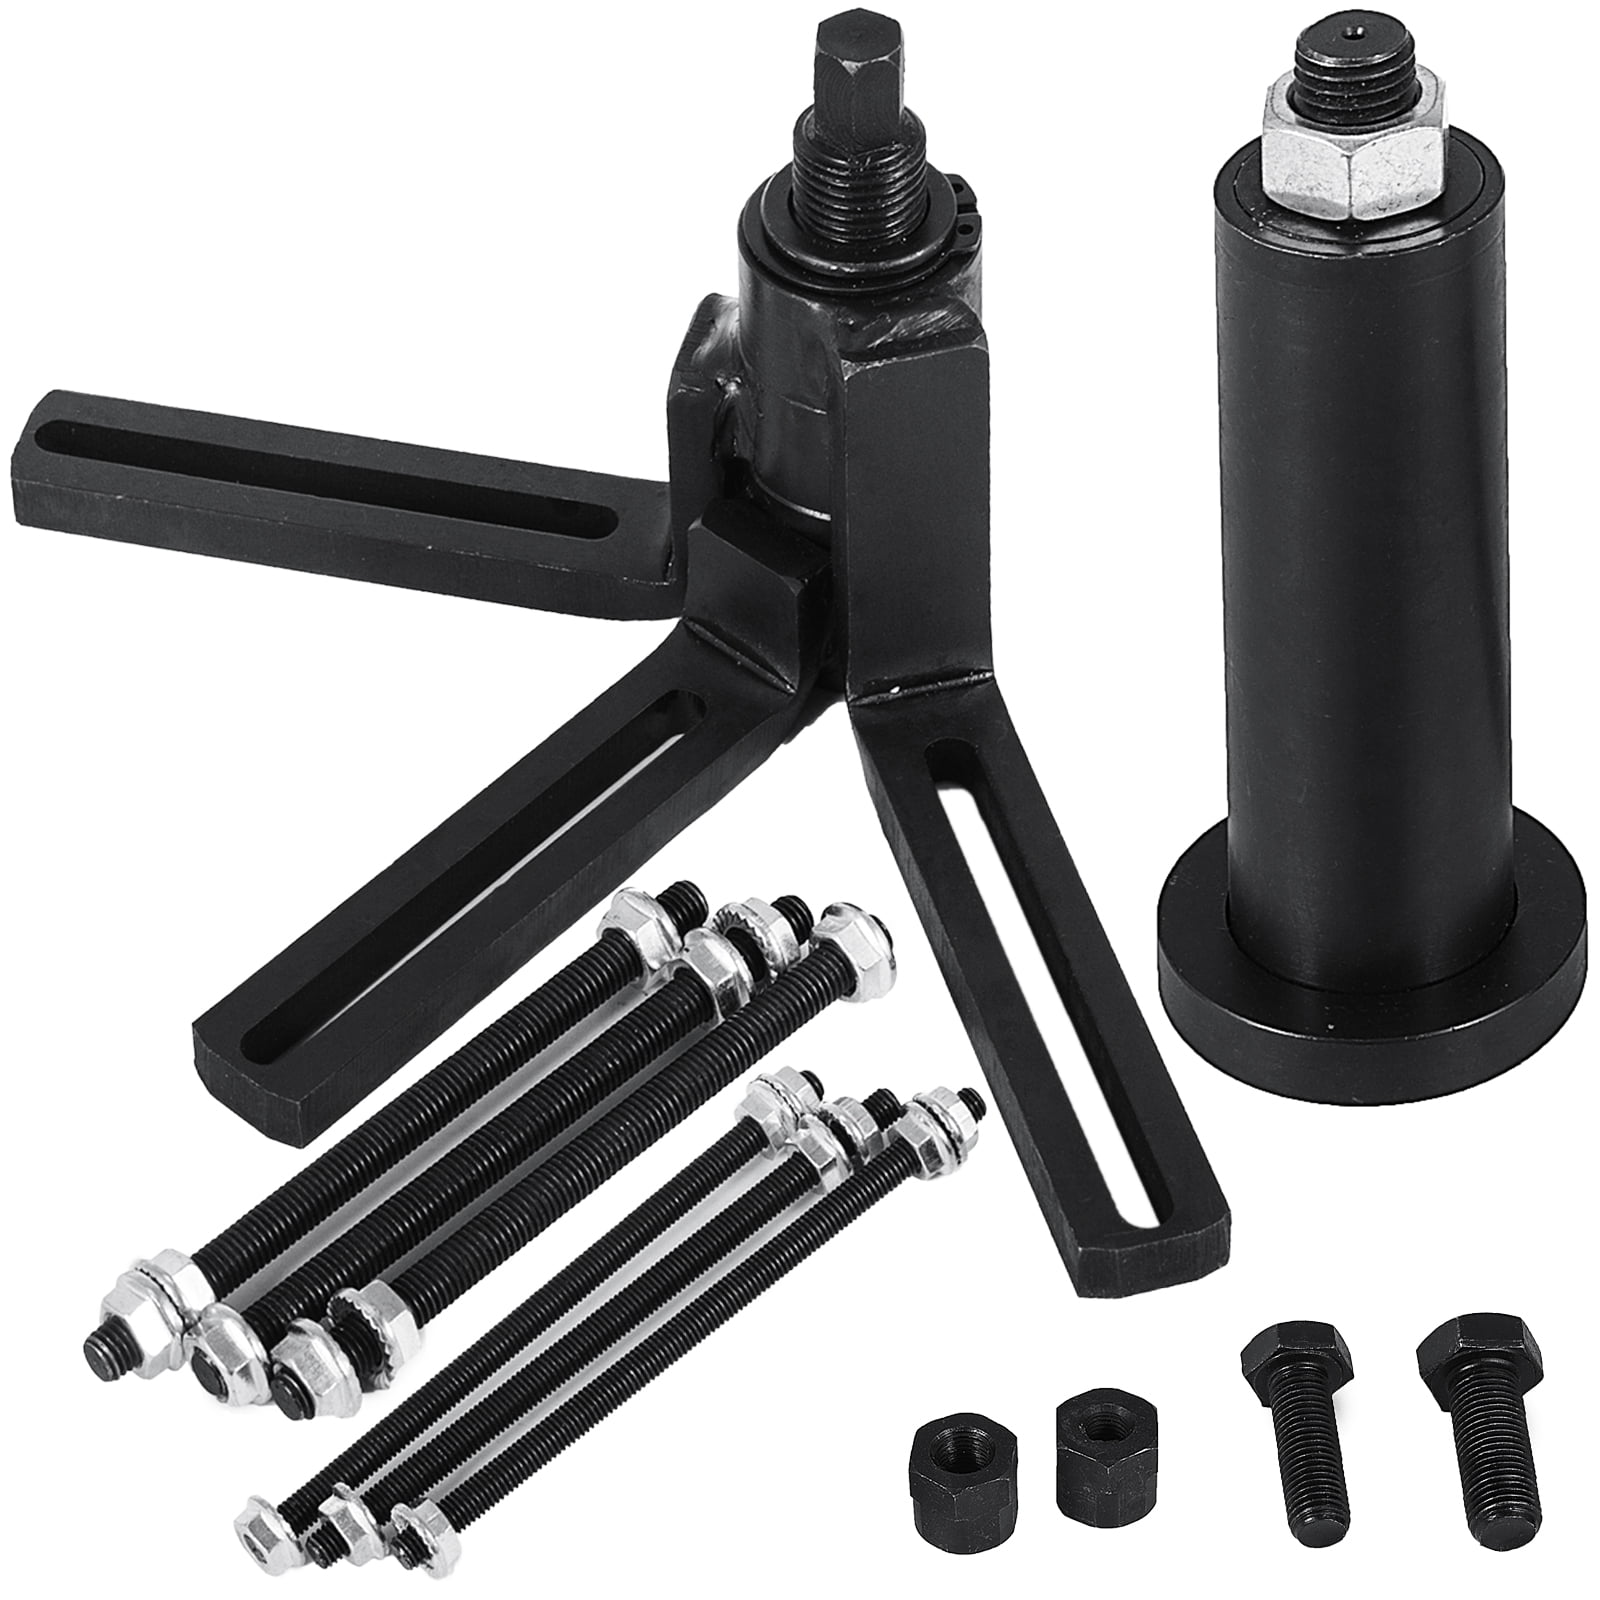 Crankcase Splitter Separator Tool Kit for Motorcycle 360 Degree Crankcase Puller and Installer Fits 2 and 4 Stroke Crankcases With 8mm & 6mm Mounting Bolts and 1 Center Pulling Bolt 